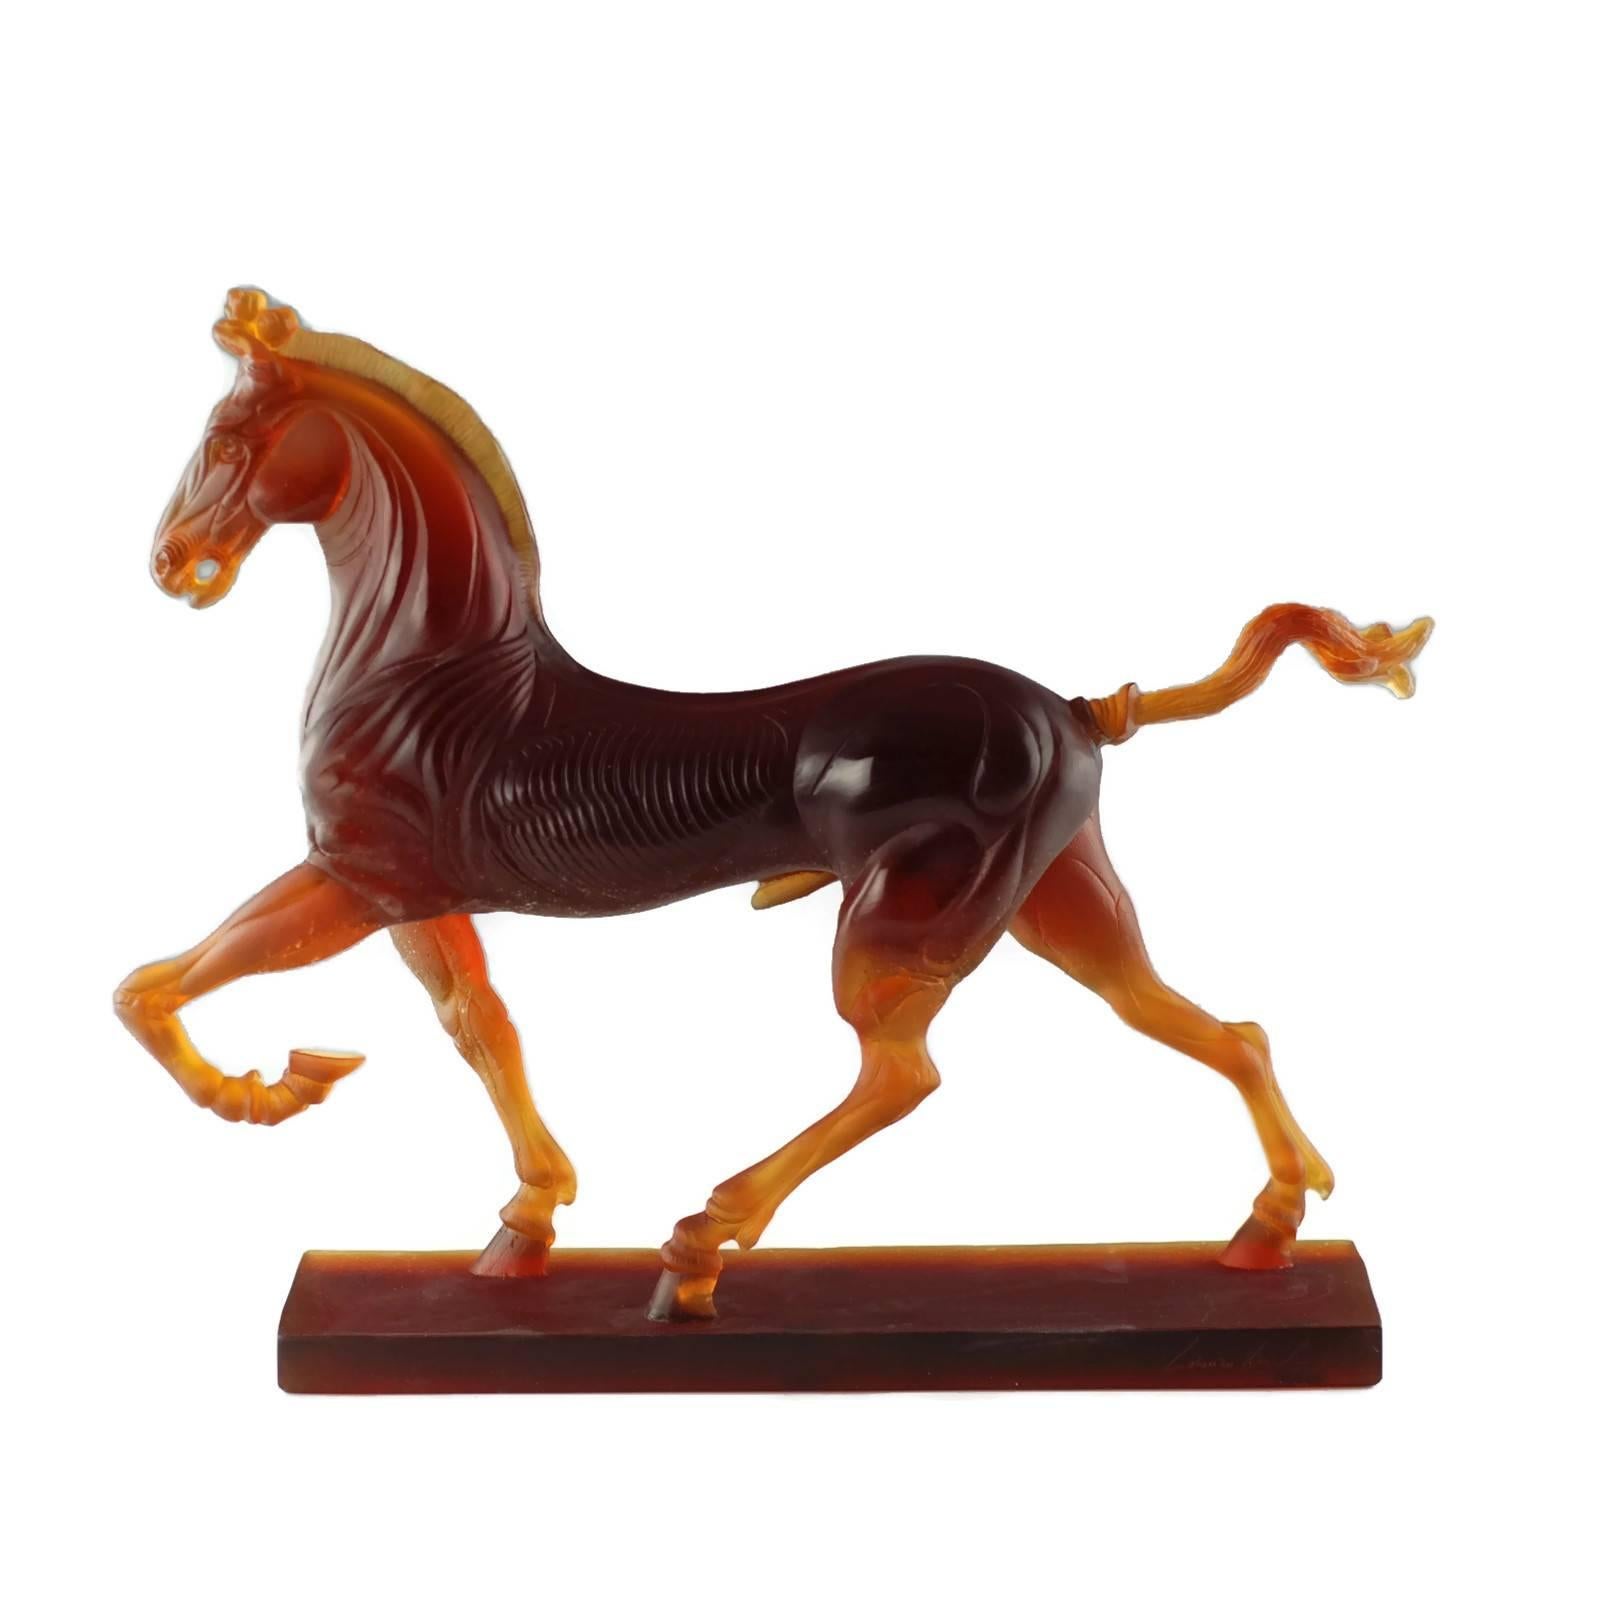 This large limited edition pâte de verre equine sculpture was designed by Ludovico De Luigi (b. 1933) for Daum Nancy and depicts a stallion standing on a rectangular plinth. The highly detailed piece has a stylized form which emphasizes the